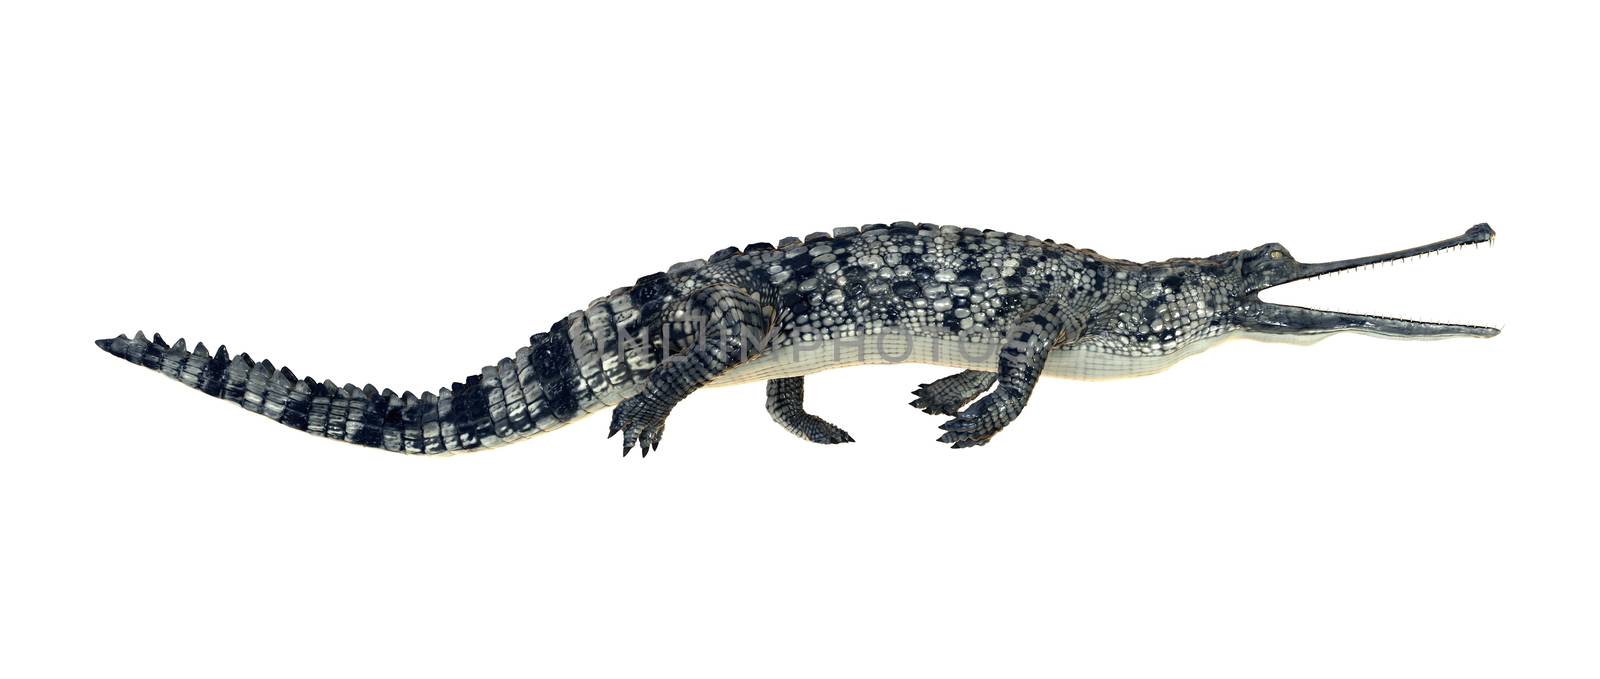 3D digital render of a gharial or Gavialis gangeticus, or gavial, or fish-eating crocodile isolated on white background